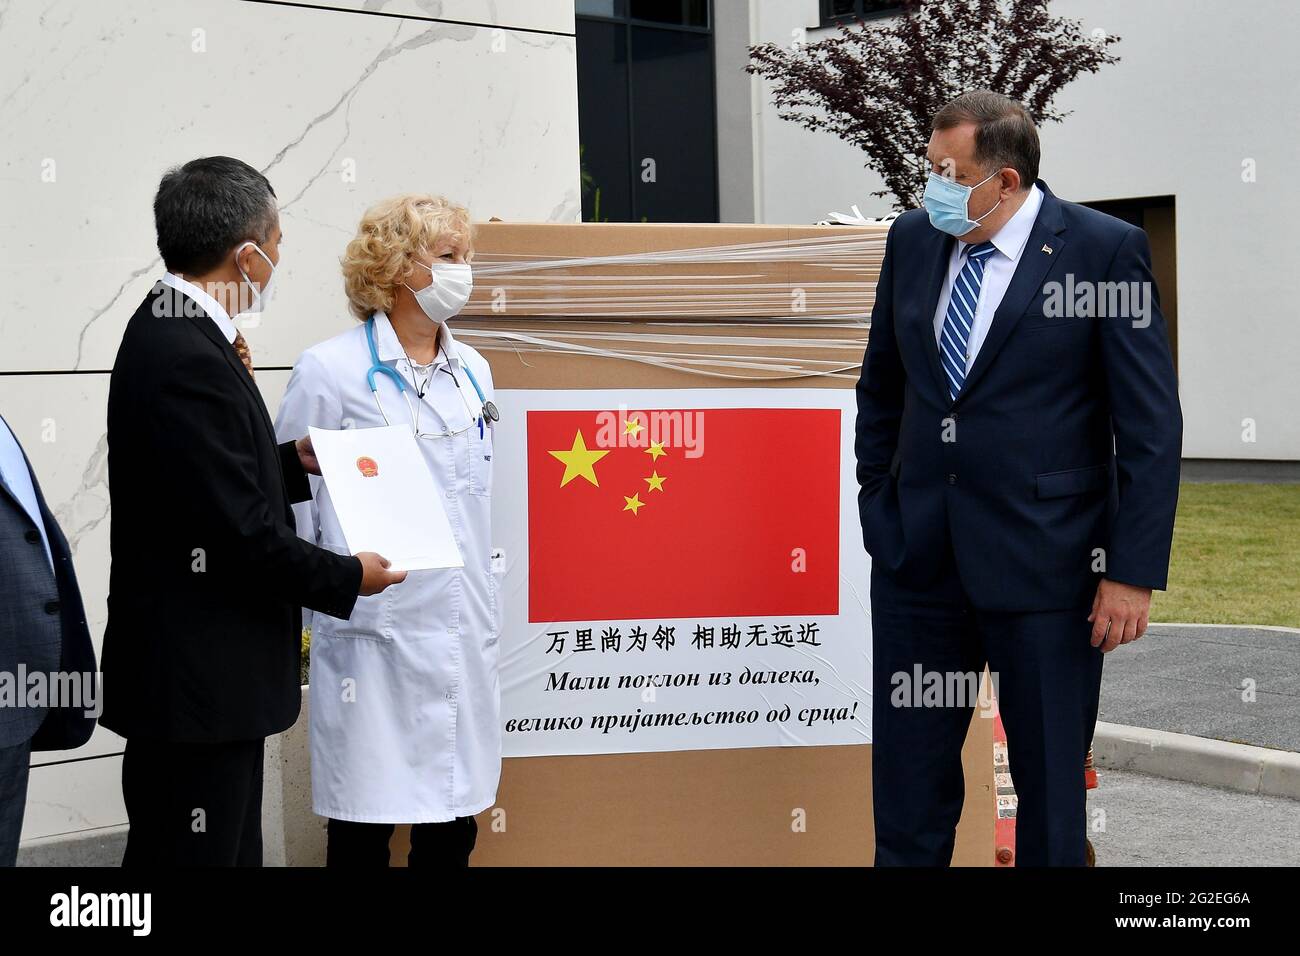 (210611) -- SARAJEVO, June 11, 2021 (Xinhua) -- Milorad Dodik (R), chairman of the Presidency of Bosnia and Herzegovina (BiH), Jadranka Jovovic (C), director of the oncology and hematology department of the Serbian Hospital, and Ji Ping (L), Chinese Ambassador to BiH attend a donation ceremony of a biological safety cabinet (also known as cyto chamber) at the Serbian Hospital, in East Sarajevo, BiH, on June 10, 2021. The Chinese Embassy in BiH on Thursday donated a biological safety cabinet to the Serbian Hospital in East Sarajevo.TO GO WITH 'China donates medical equipment to hospital in BiH' Stock Photo